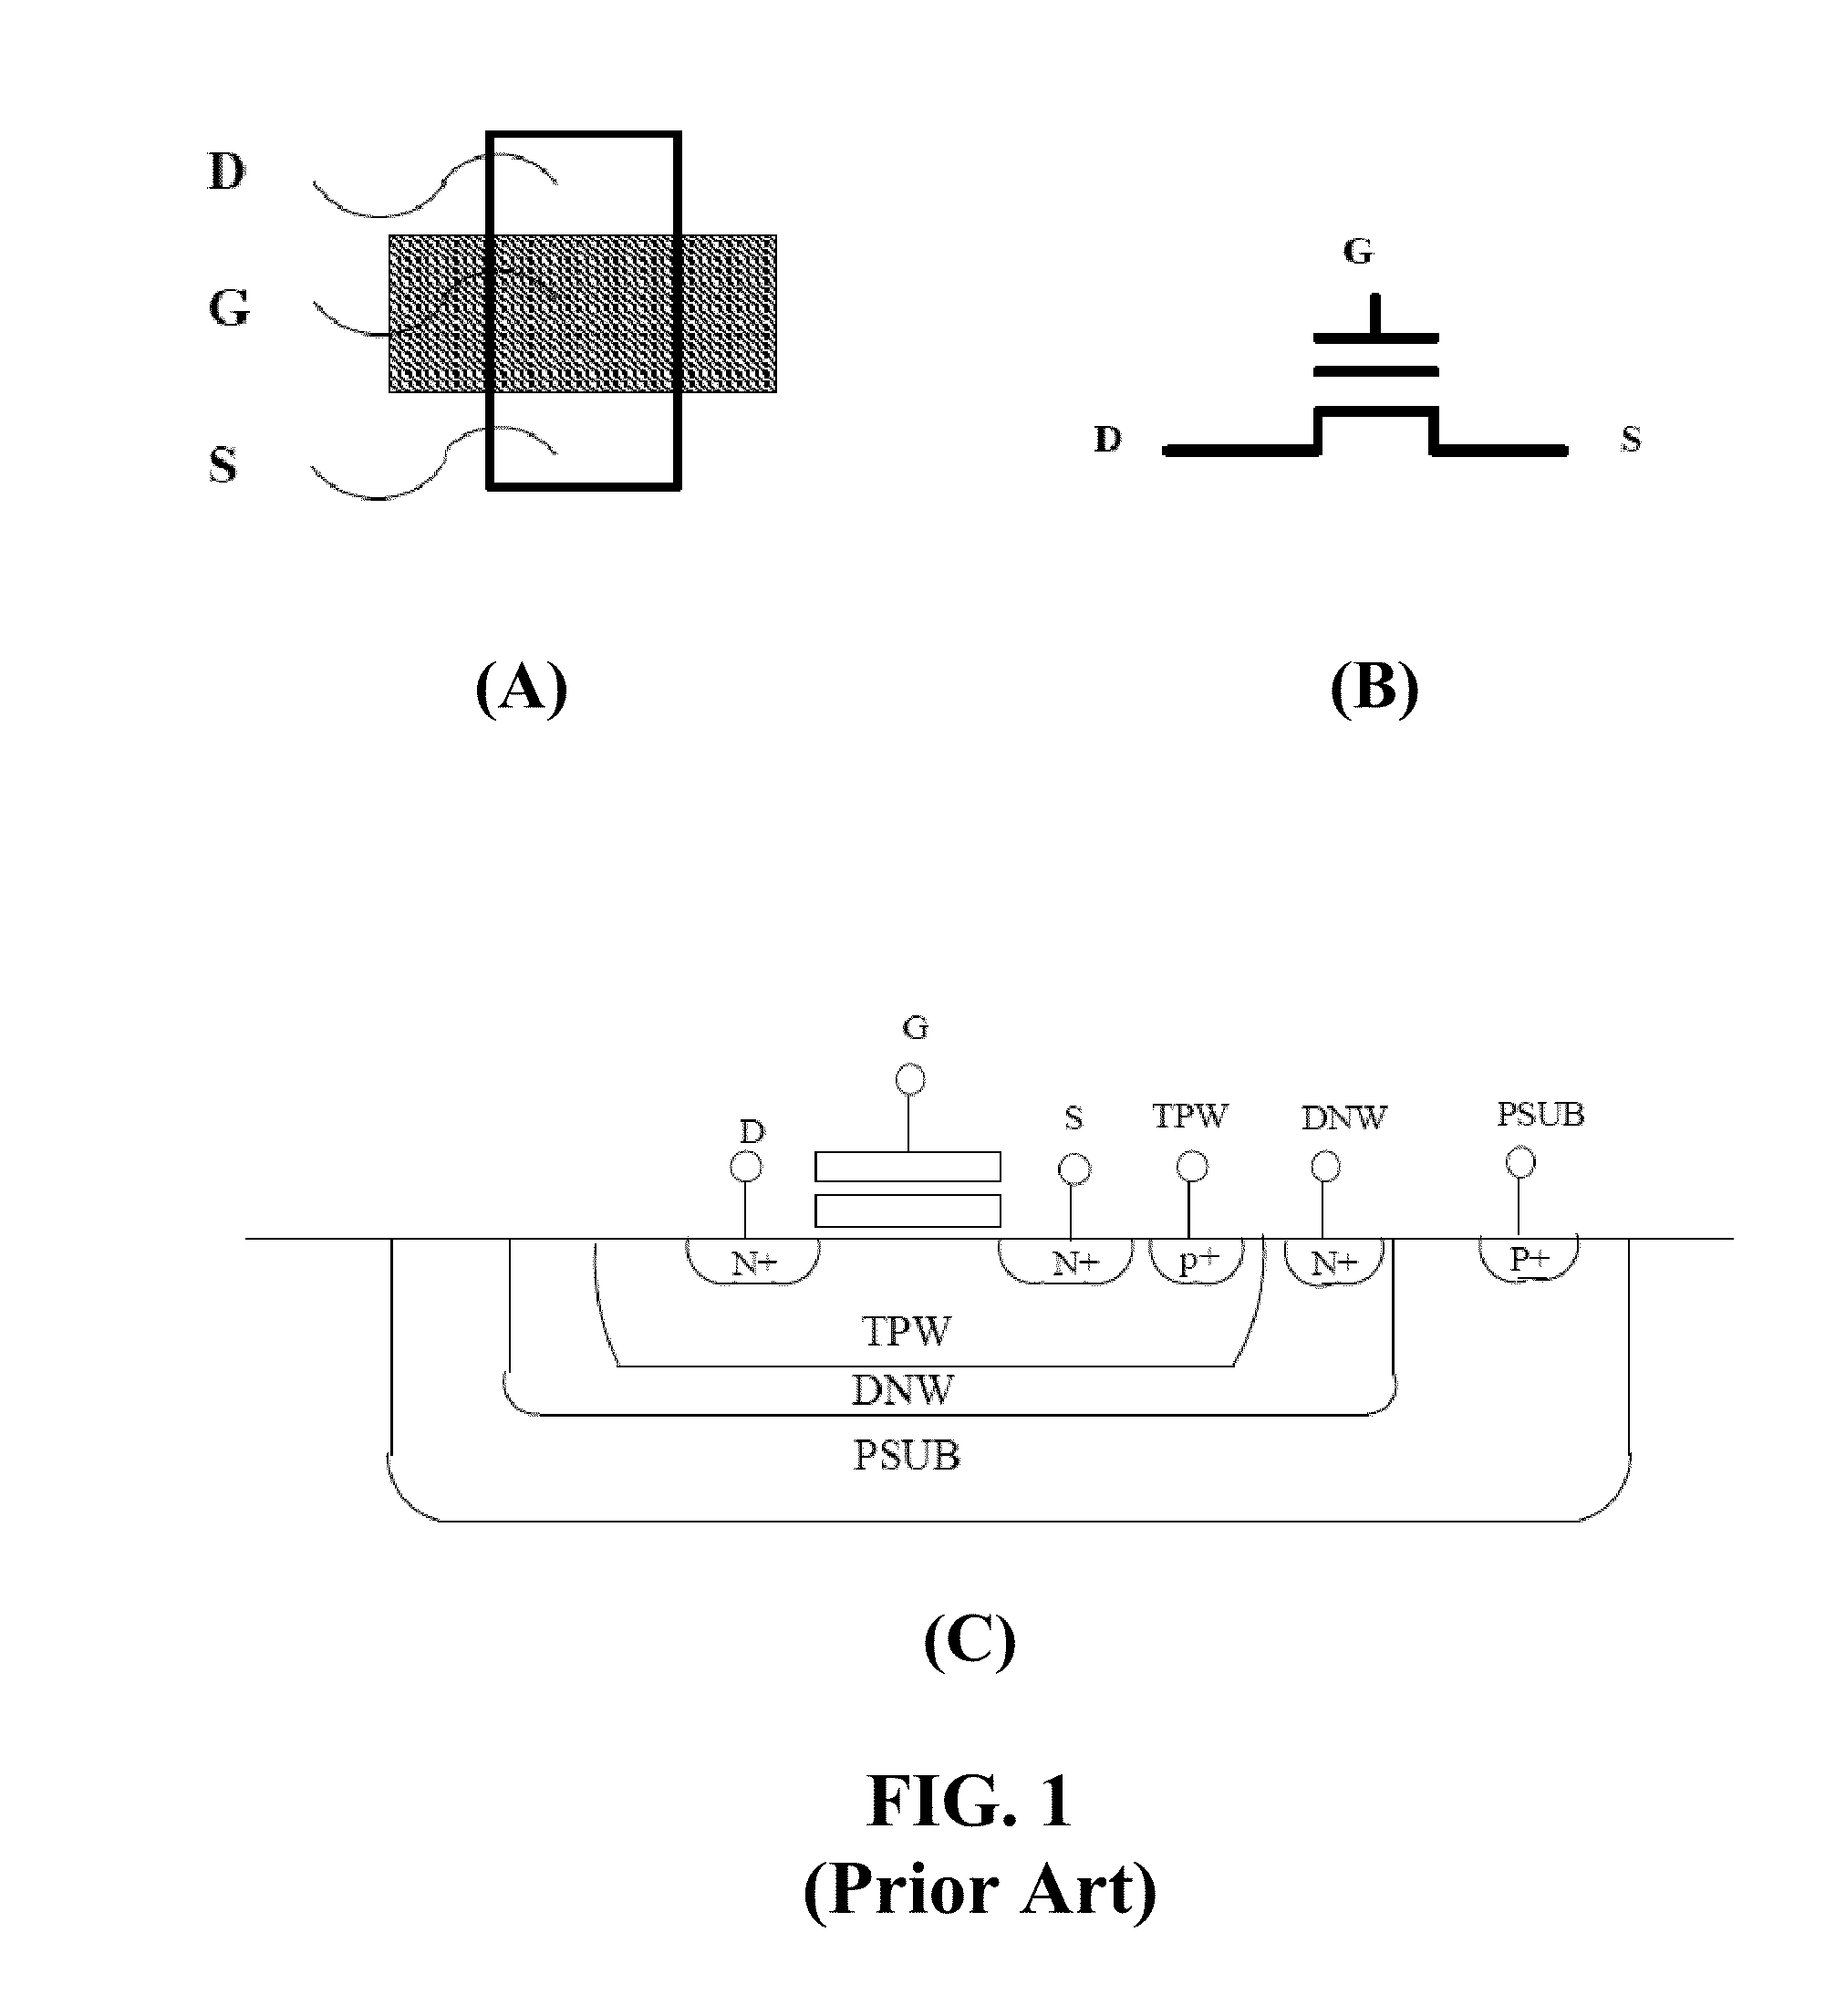 Memory system having NAND-based nor and NAND flashes and SRAM integrated in one chip for hybrid data, code and cache storage